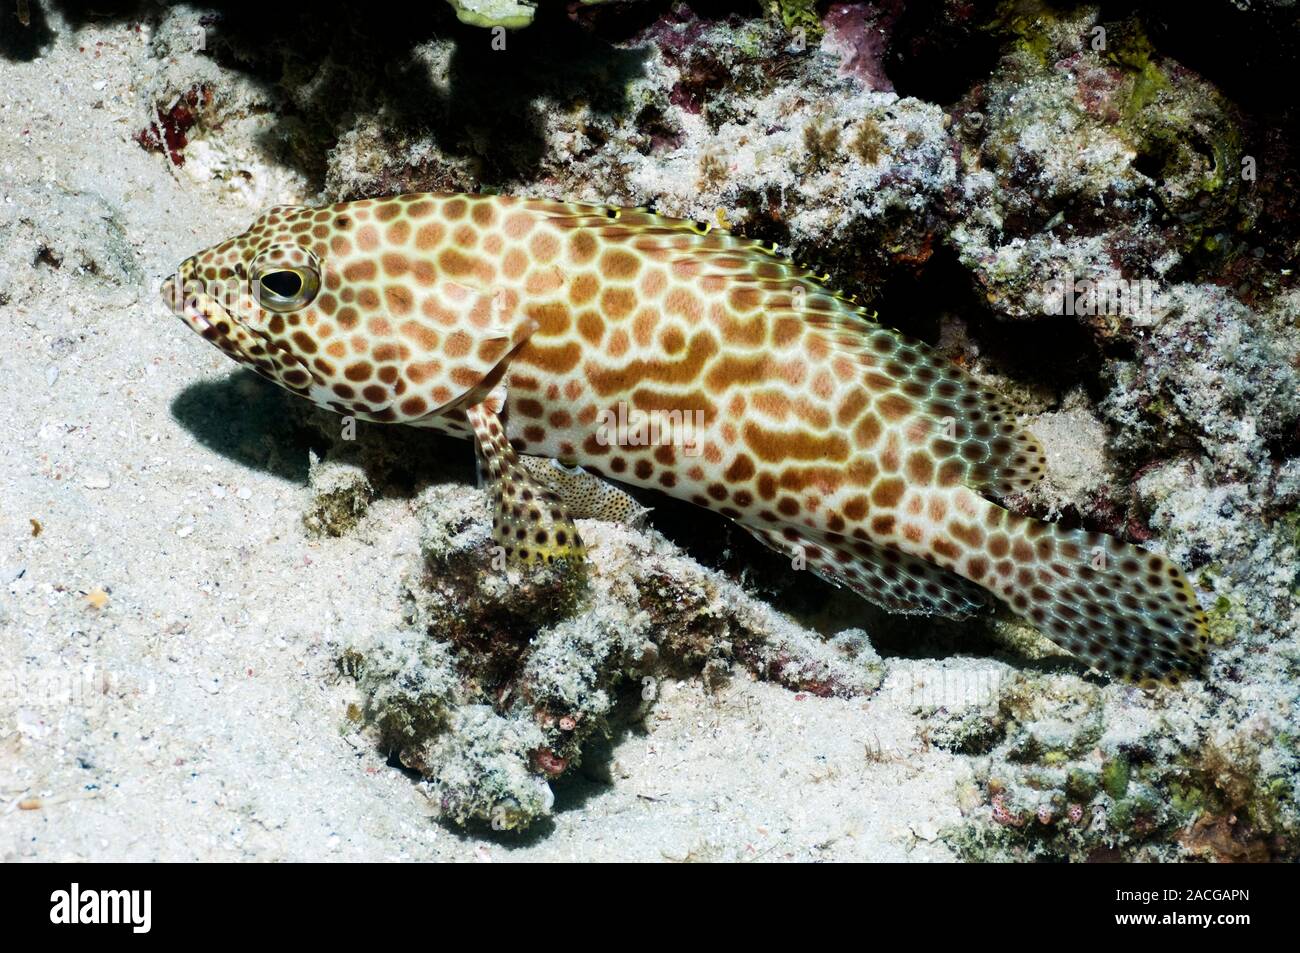 Honeycomb grouper (Epinephelus merra). This fish can reach 28 centimetres in length. It has characteristic round to hexagonal brown spots on its body. Stock Photo